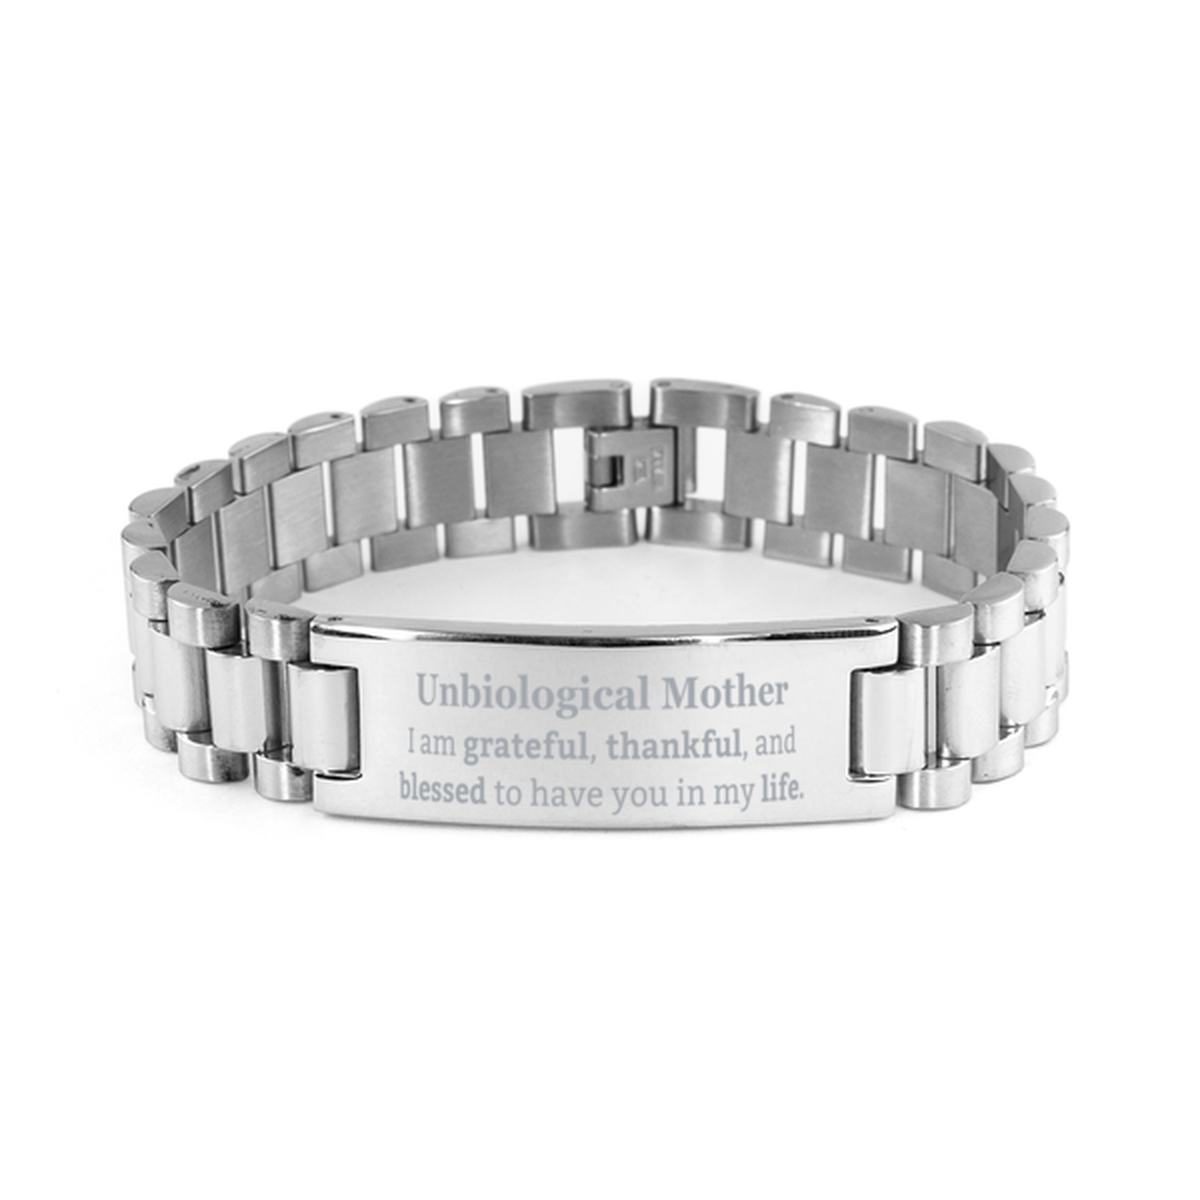 Unbiological Mother Appreciation Gifts, I am grateful, thankful, and blessed, Thank You Ladder Stainless Steel Bracelet for Unbiological Mother, Birthday Inspiration Gifts for Unbiological Mother